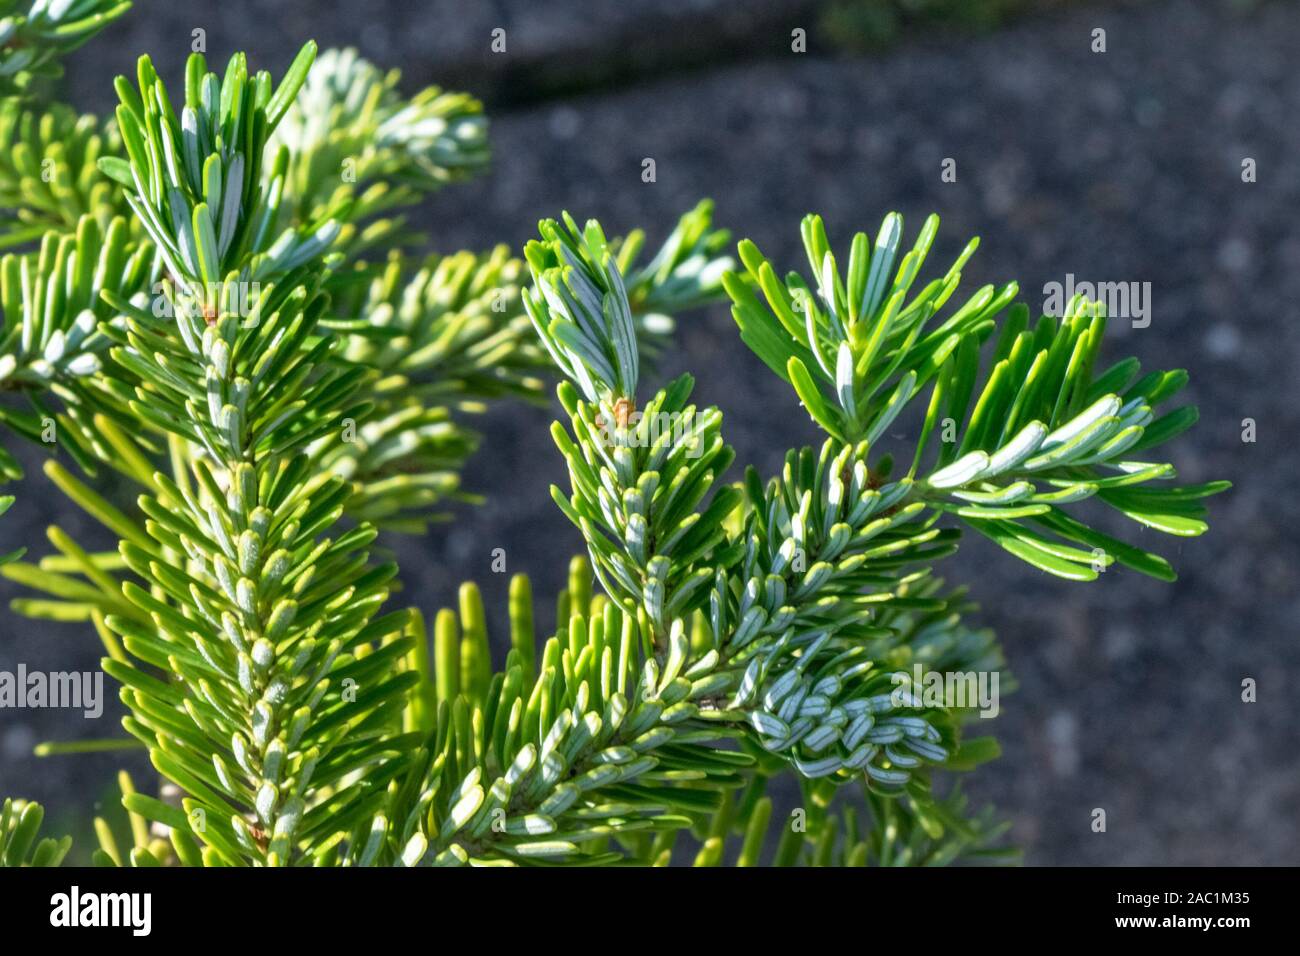 Detailed view of young twigs of Korean fir (Abies koreana) during springtime. Beautiful soft silvery green colored needles. Stock Photo